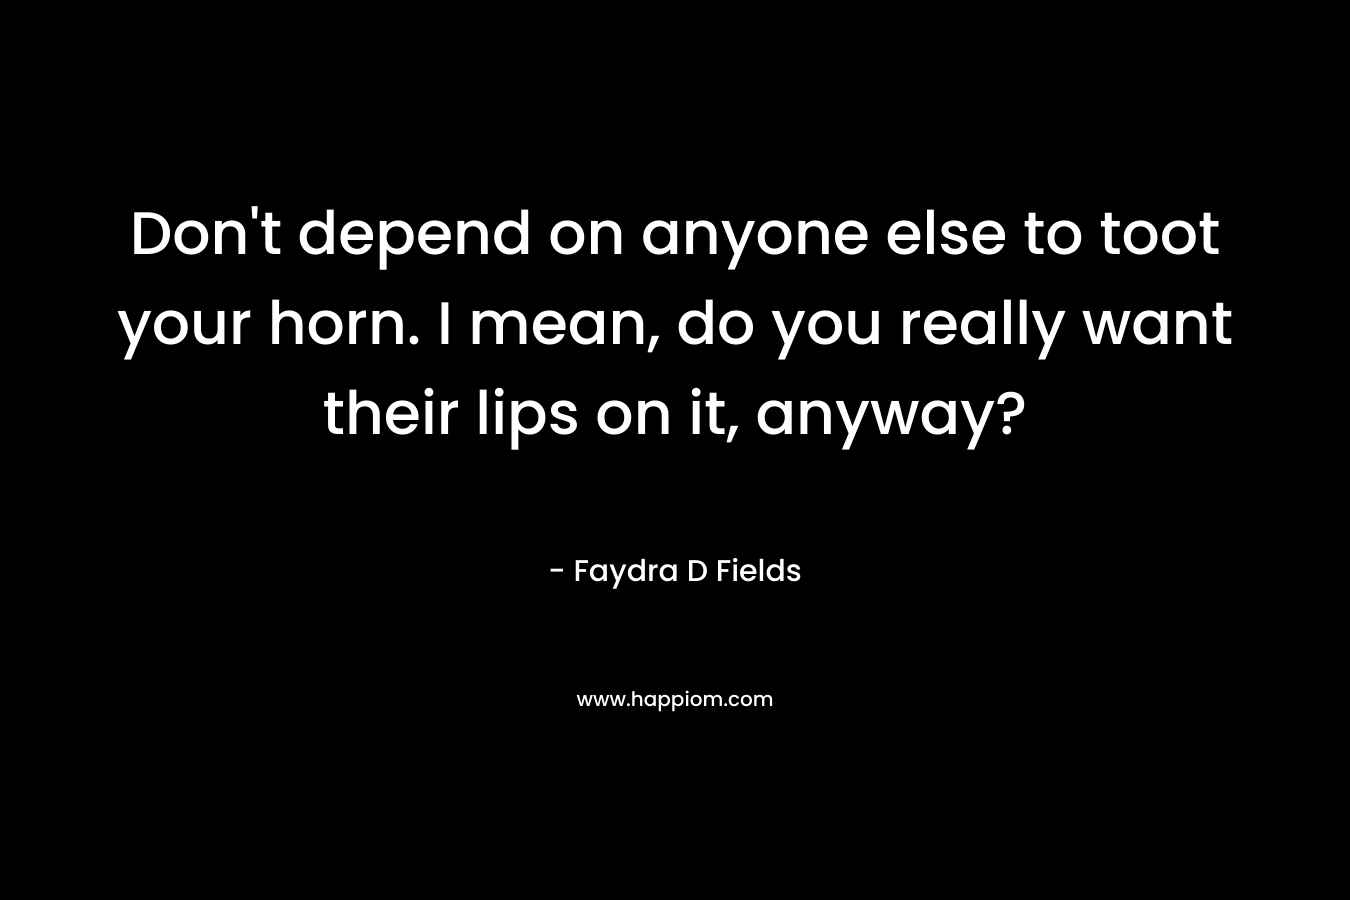 Don’t depend on anyone else to toot your horn. I mean, do you really want their lips on it, anyway? – Faydra D Fields